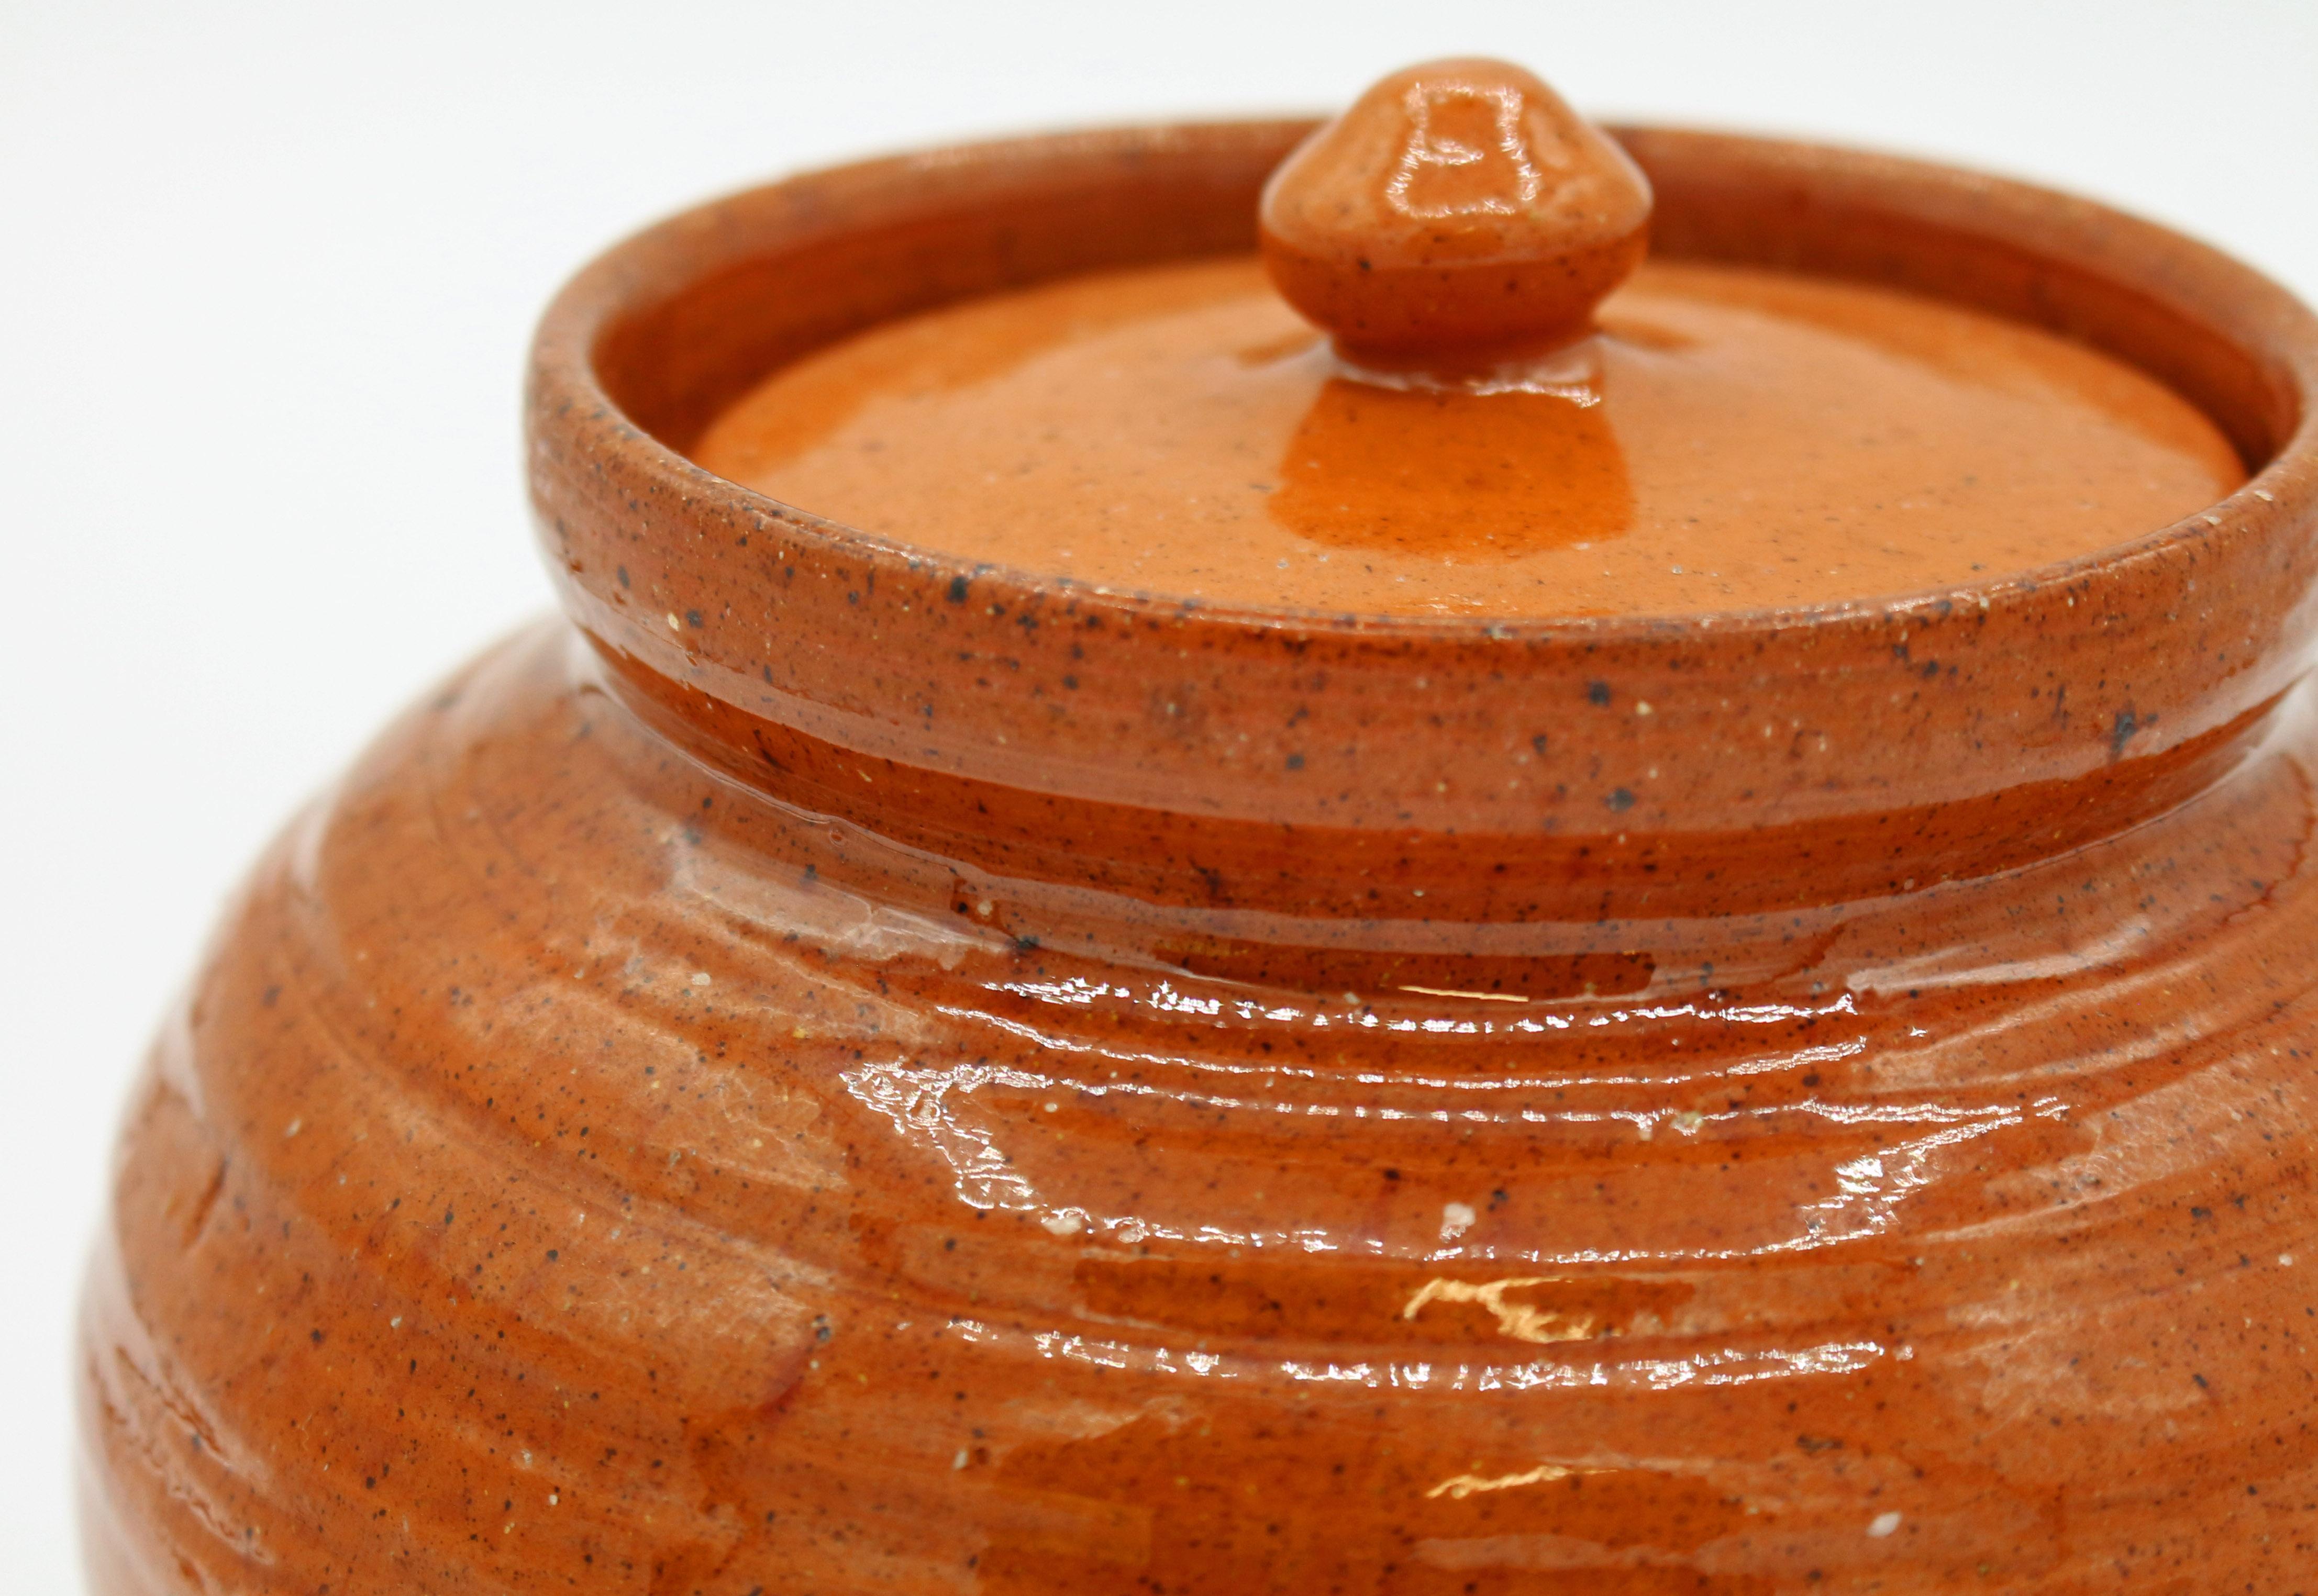 20th Century Circa 1930-50 Jugtown Covered Pot by Ben Owen I For Sale